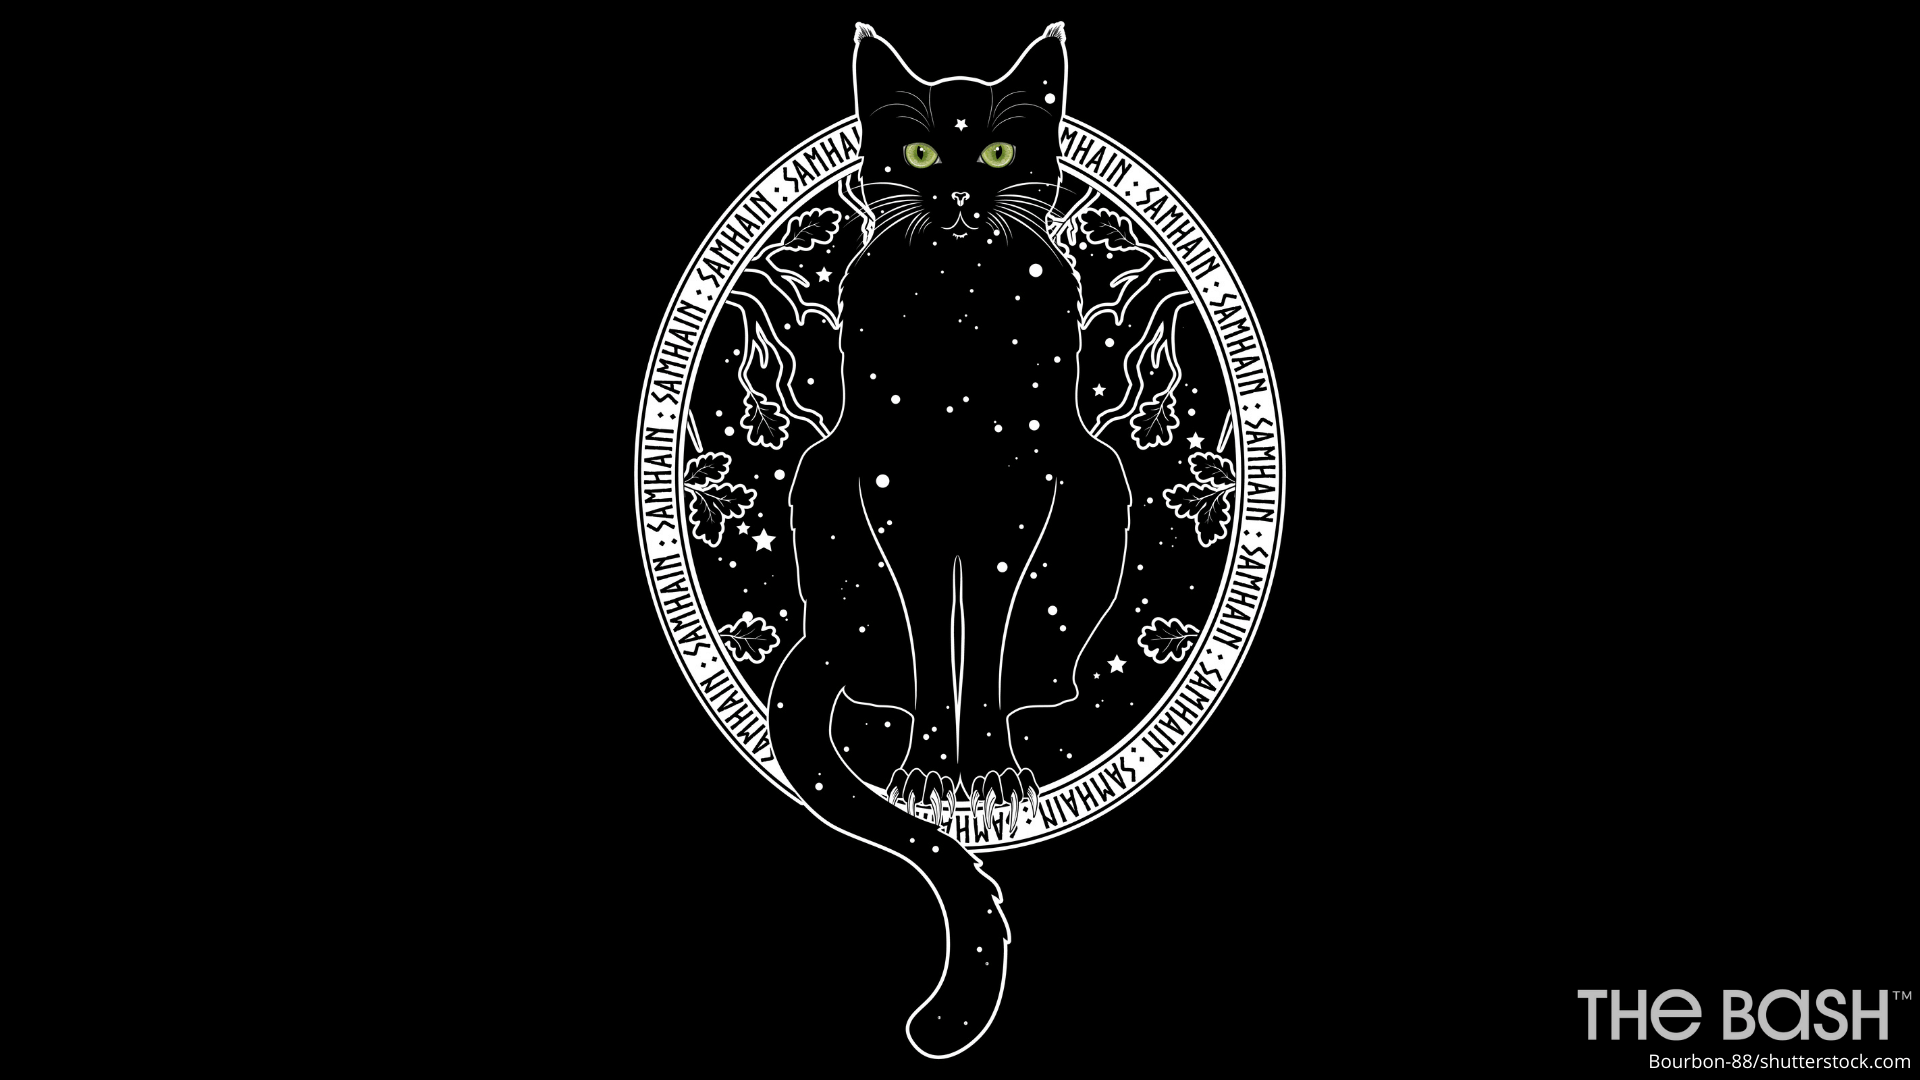 A black cat sitting in a circle with the text 